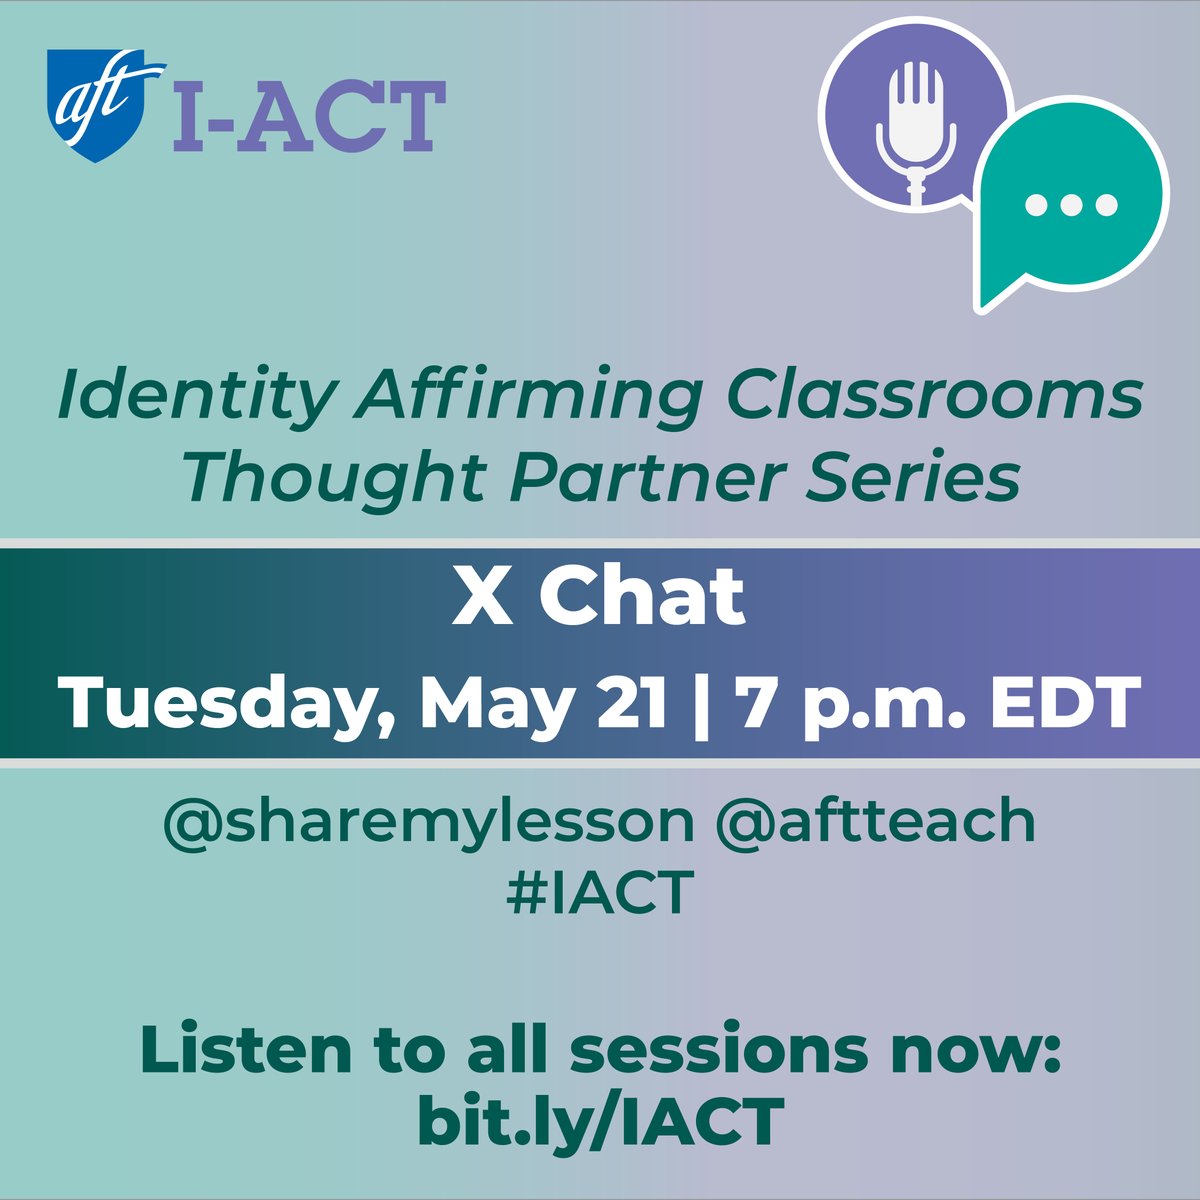 Allies and change-makers unite! Gear up to join the X chat & start creating identity-affirming spaces. Can't wait to see you there! Strengthening partnerships. Taking Action. Our mission awaits 👉 sharemylesson.com/blog/identity-… #IACT @mdboone_edu @AFTunion @LisaDickin28792 @MarlaUcelli